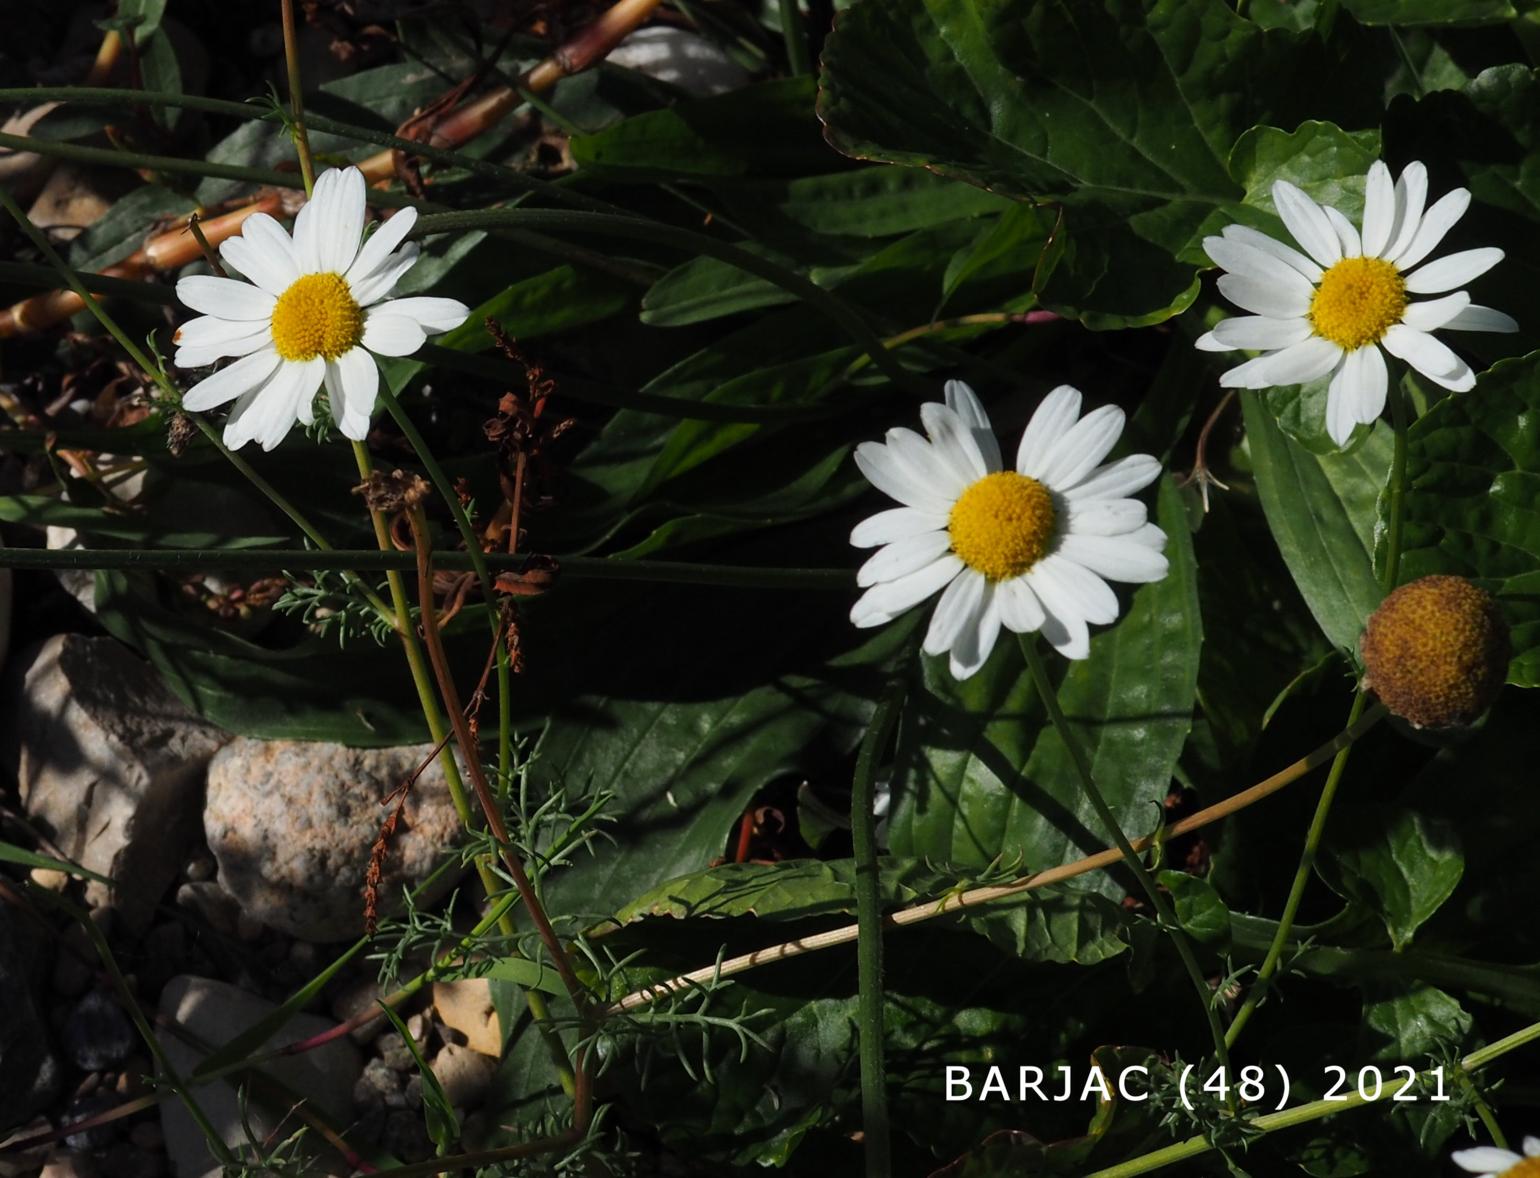 Mayweed, Scentless